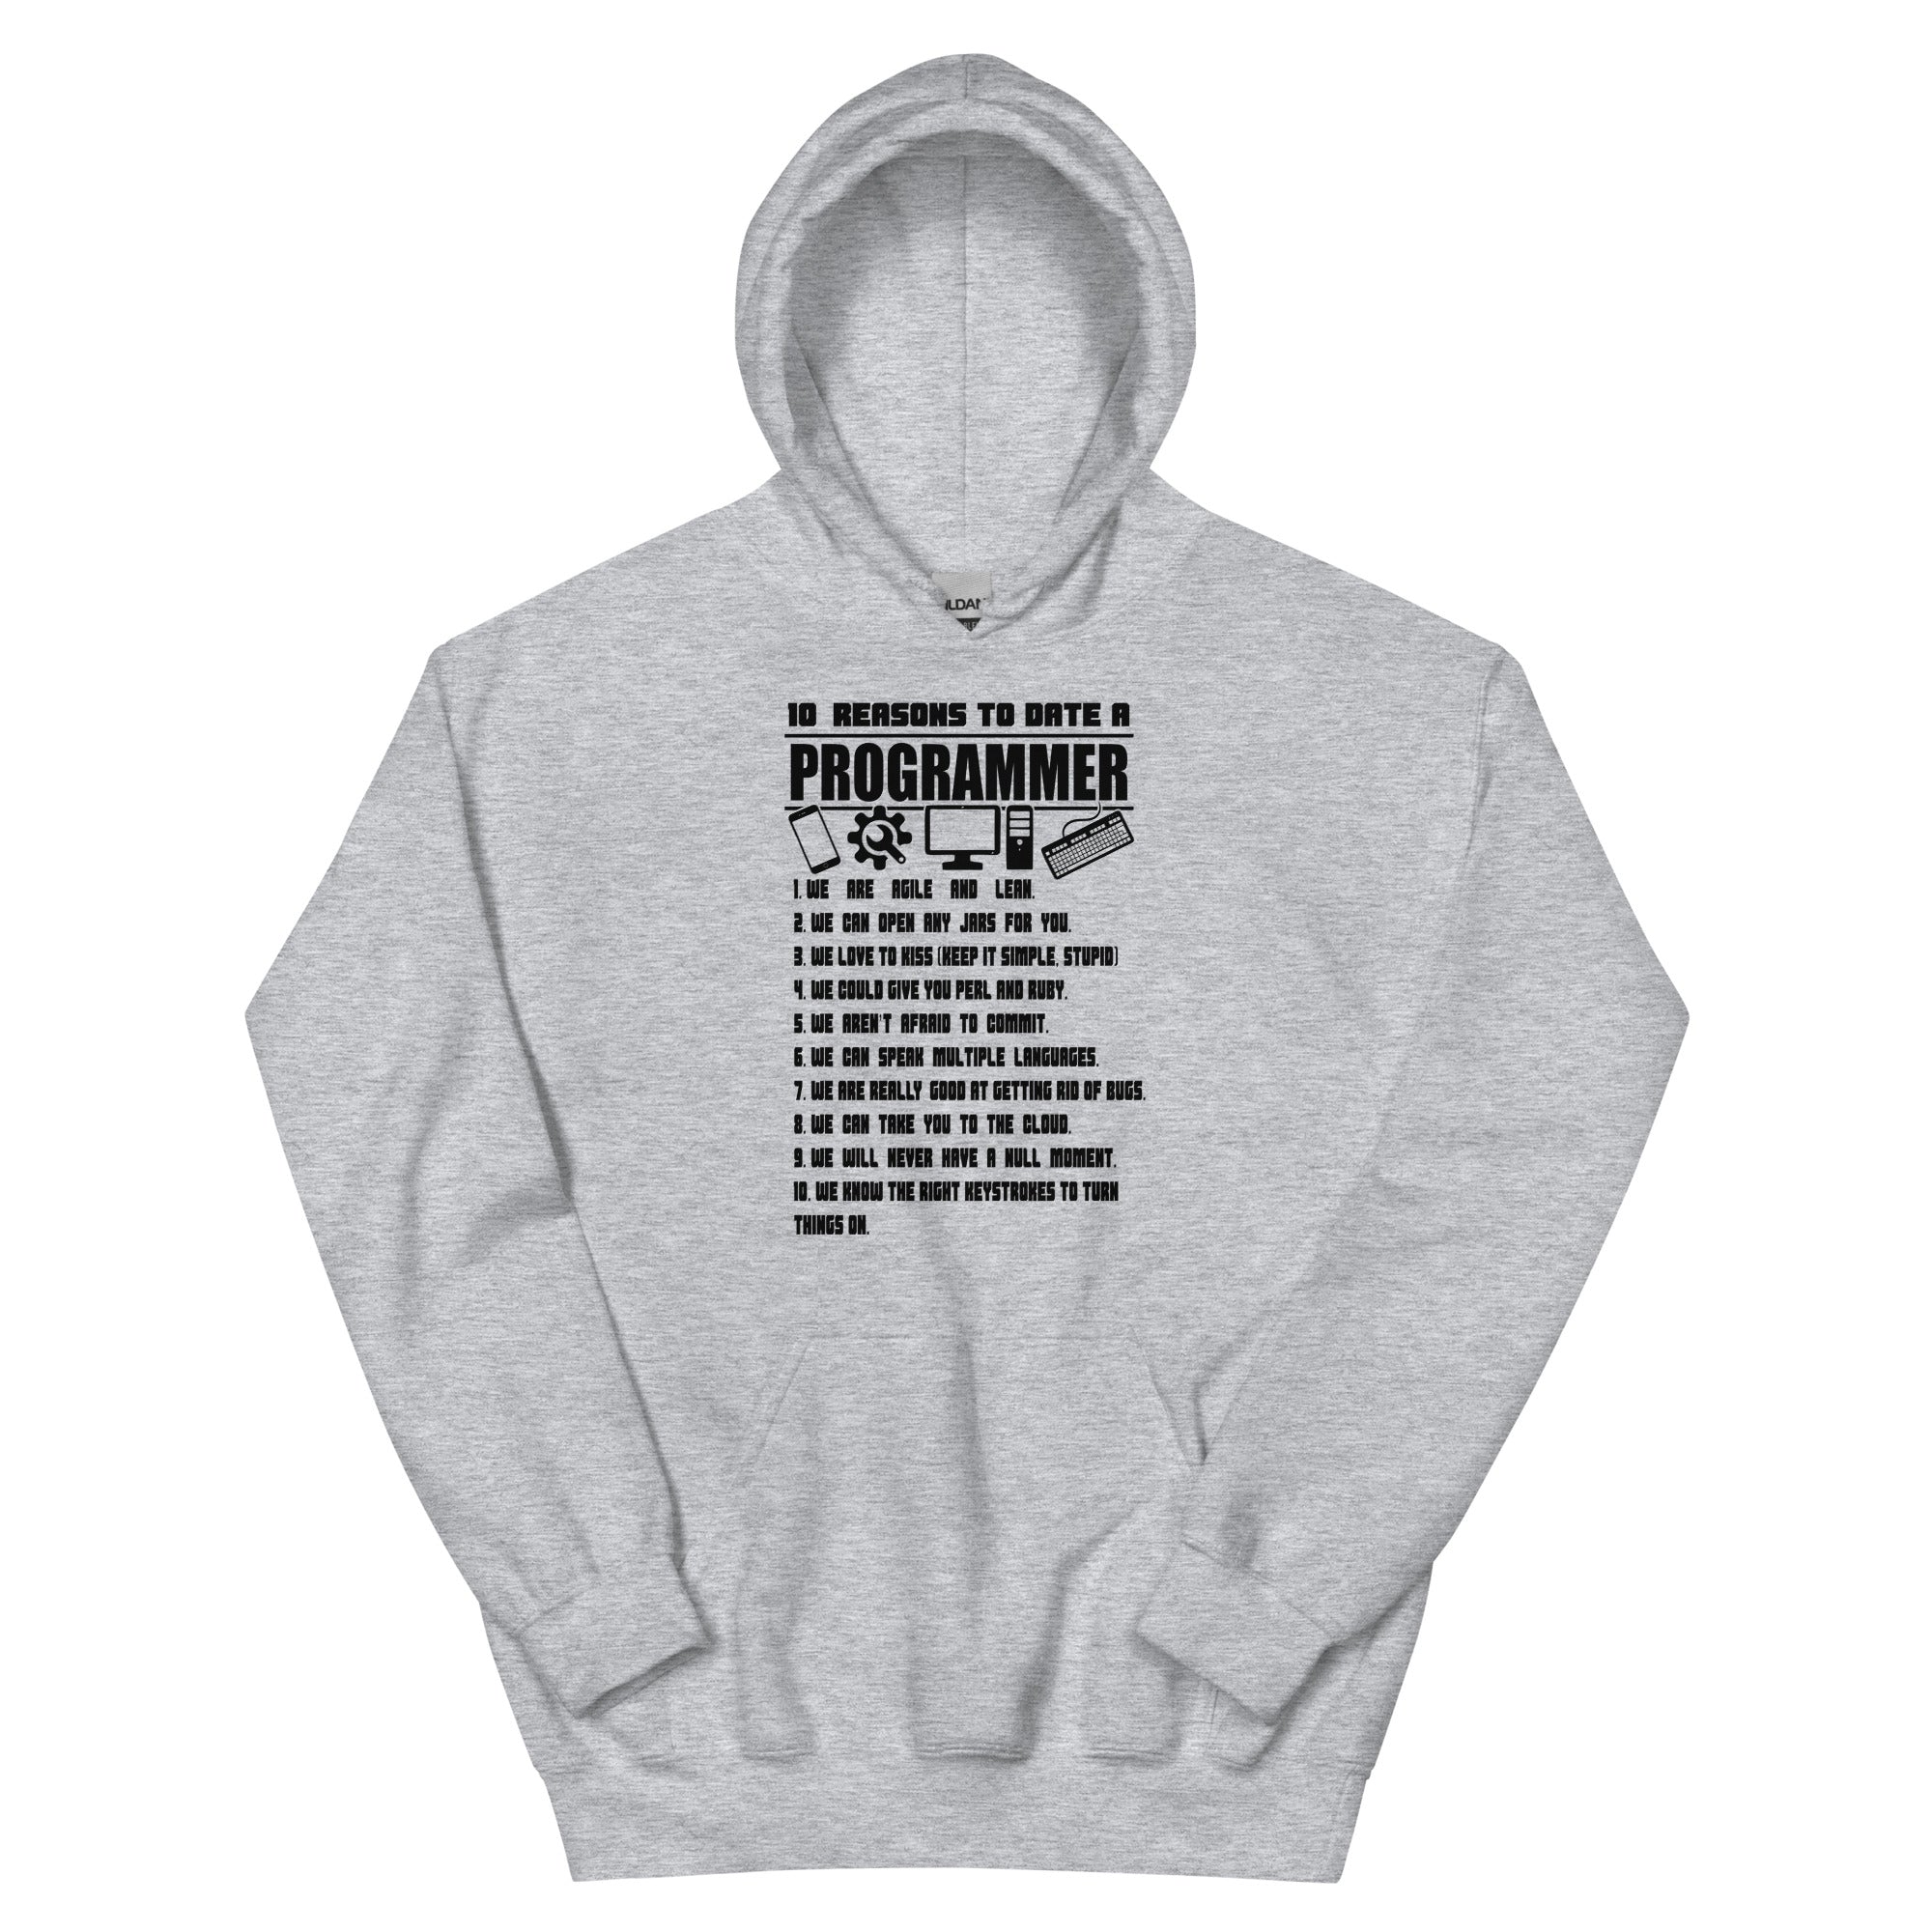 10 Reasons To Date A Programmer - Unisex Hoodie